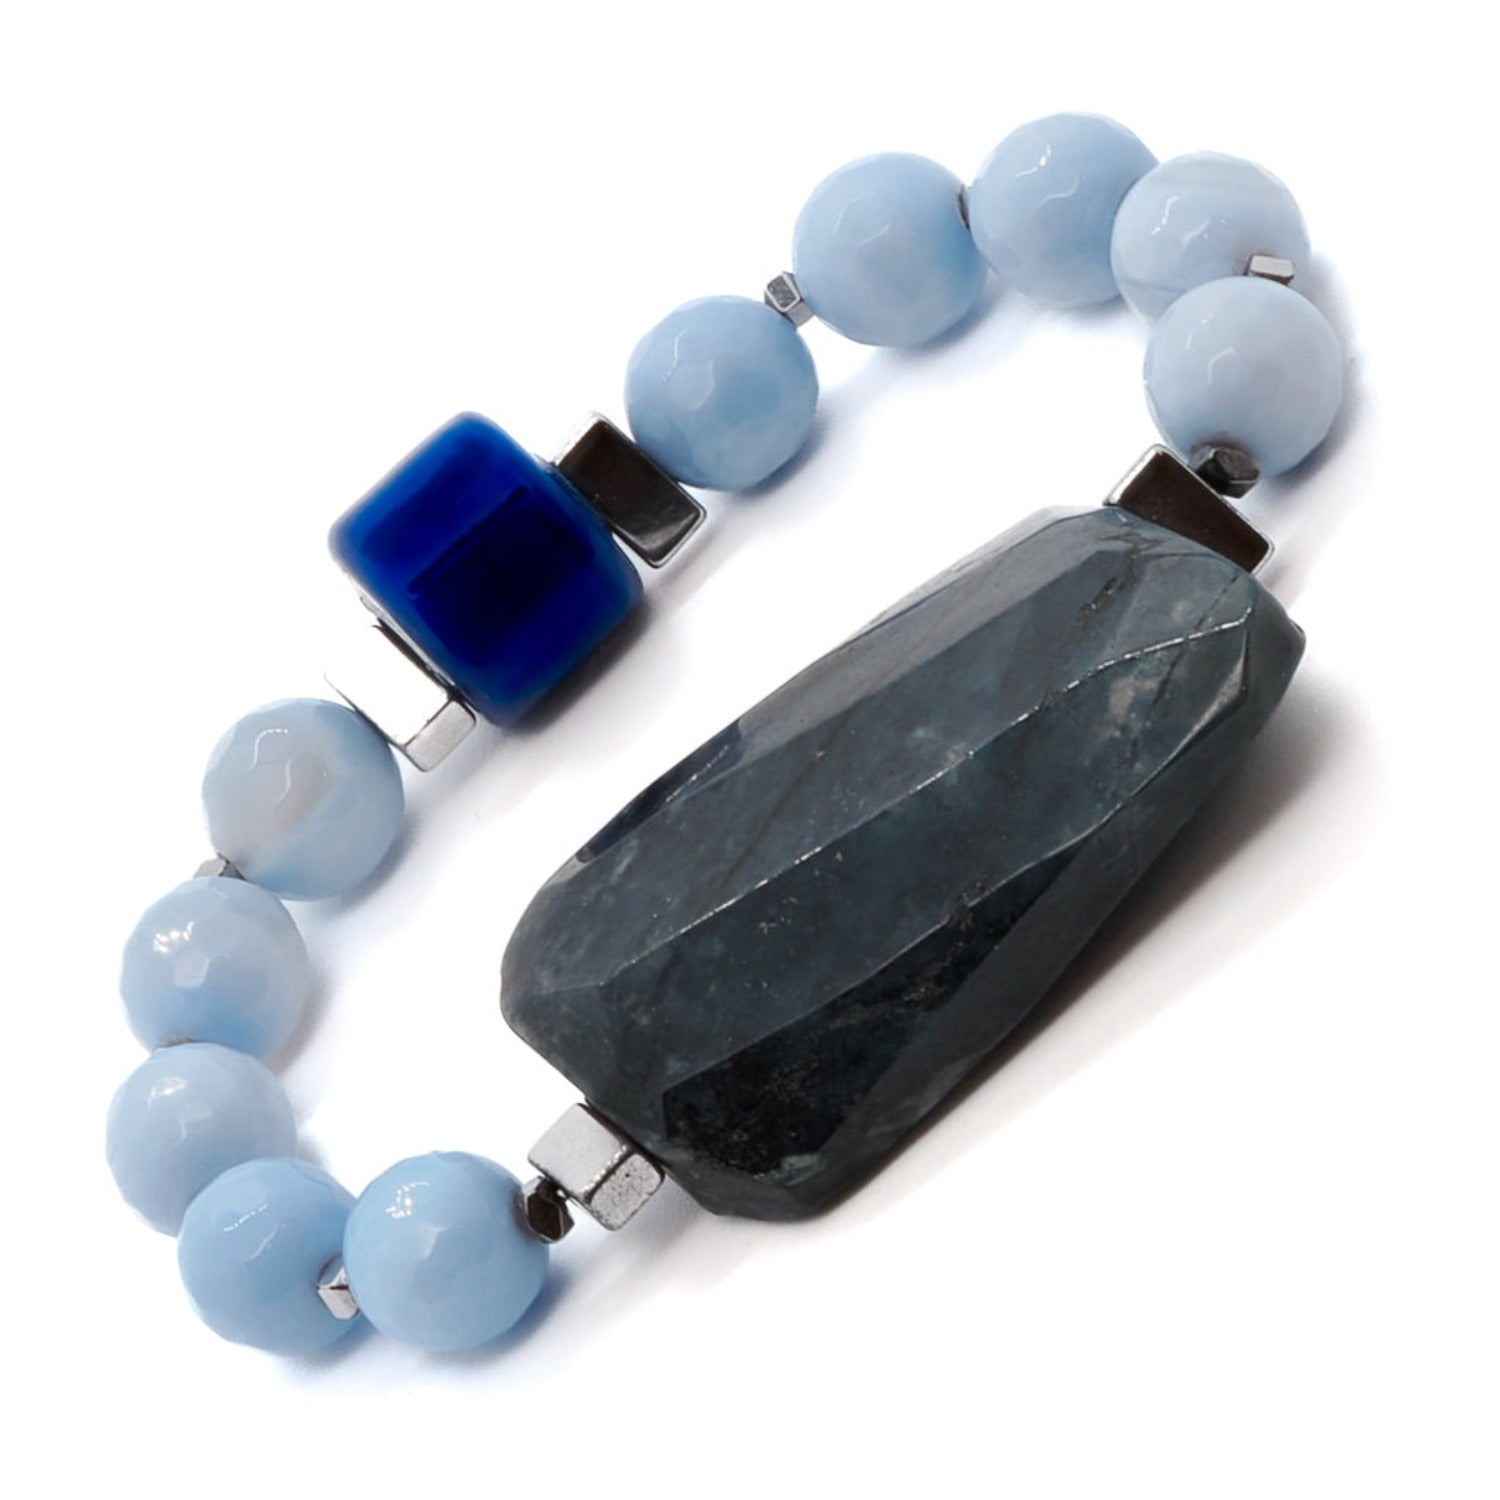 Tranquil Blue Sky Bracelet for Calm and Peaceful Energy